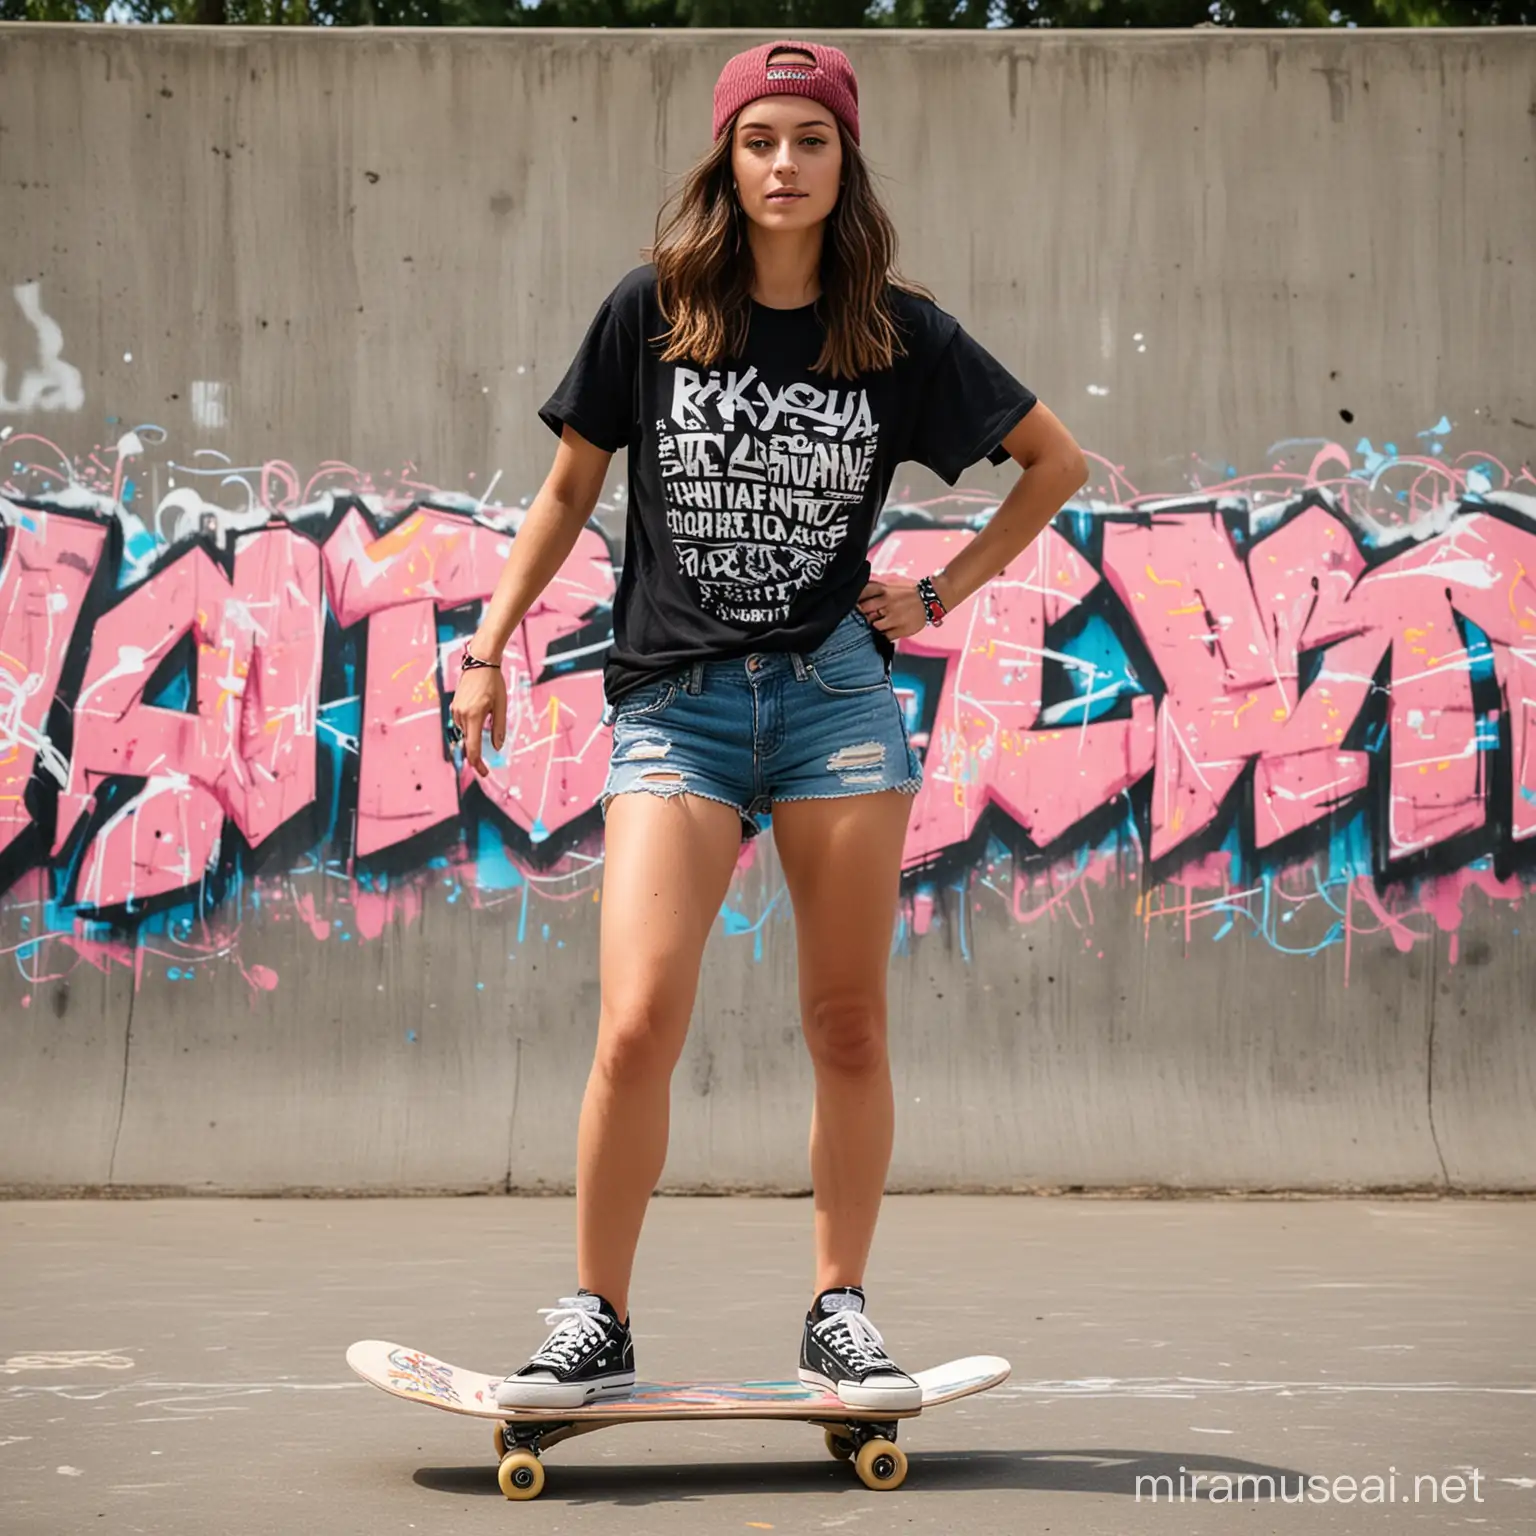 Dressed in a graphic tee and denim shorts, Milana practices skateboarding at a local skate park adorned with vibrant graffiti.